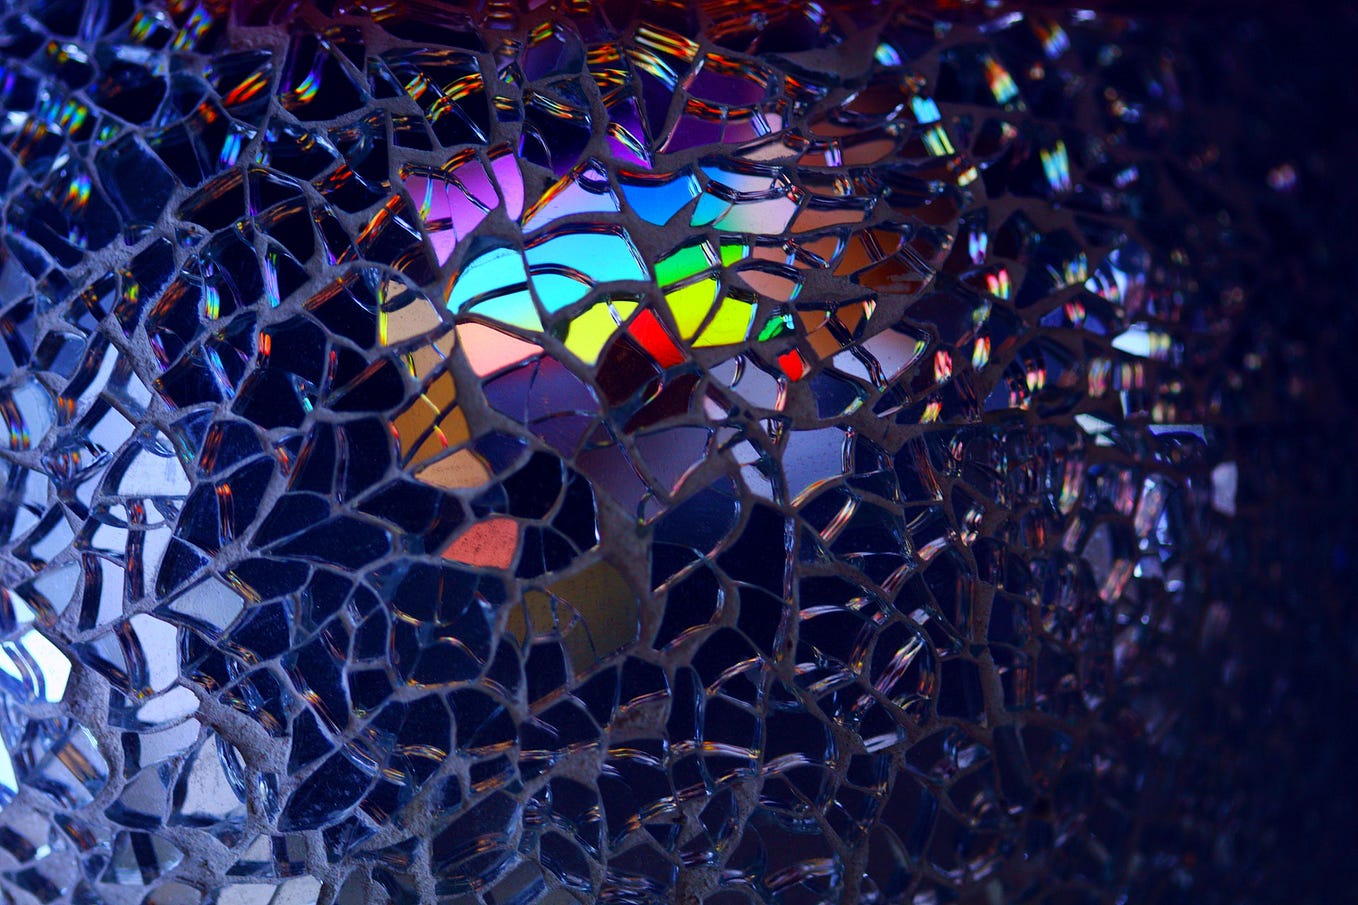 Photo of a fragmented mirror with different colors showing is CC0 courtesy of pexels.com